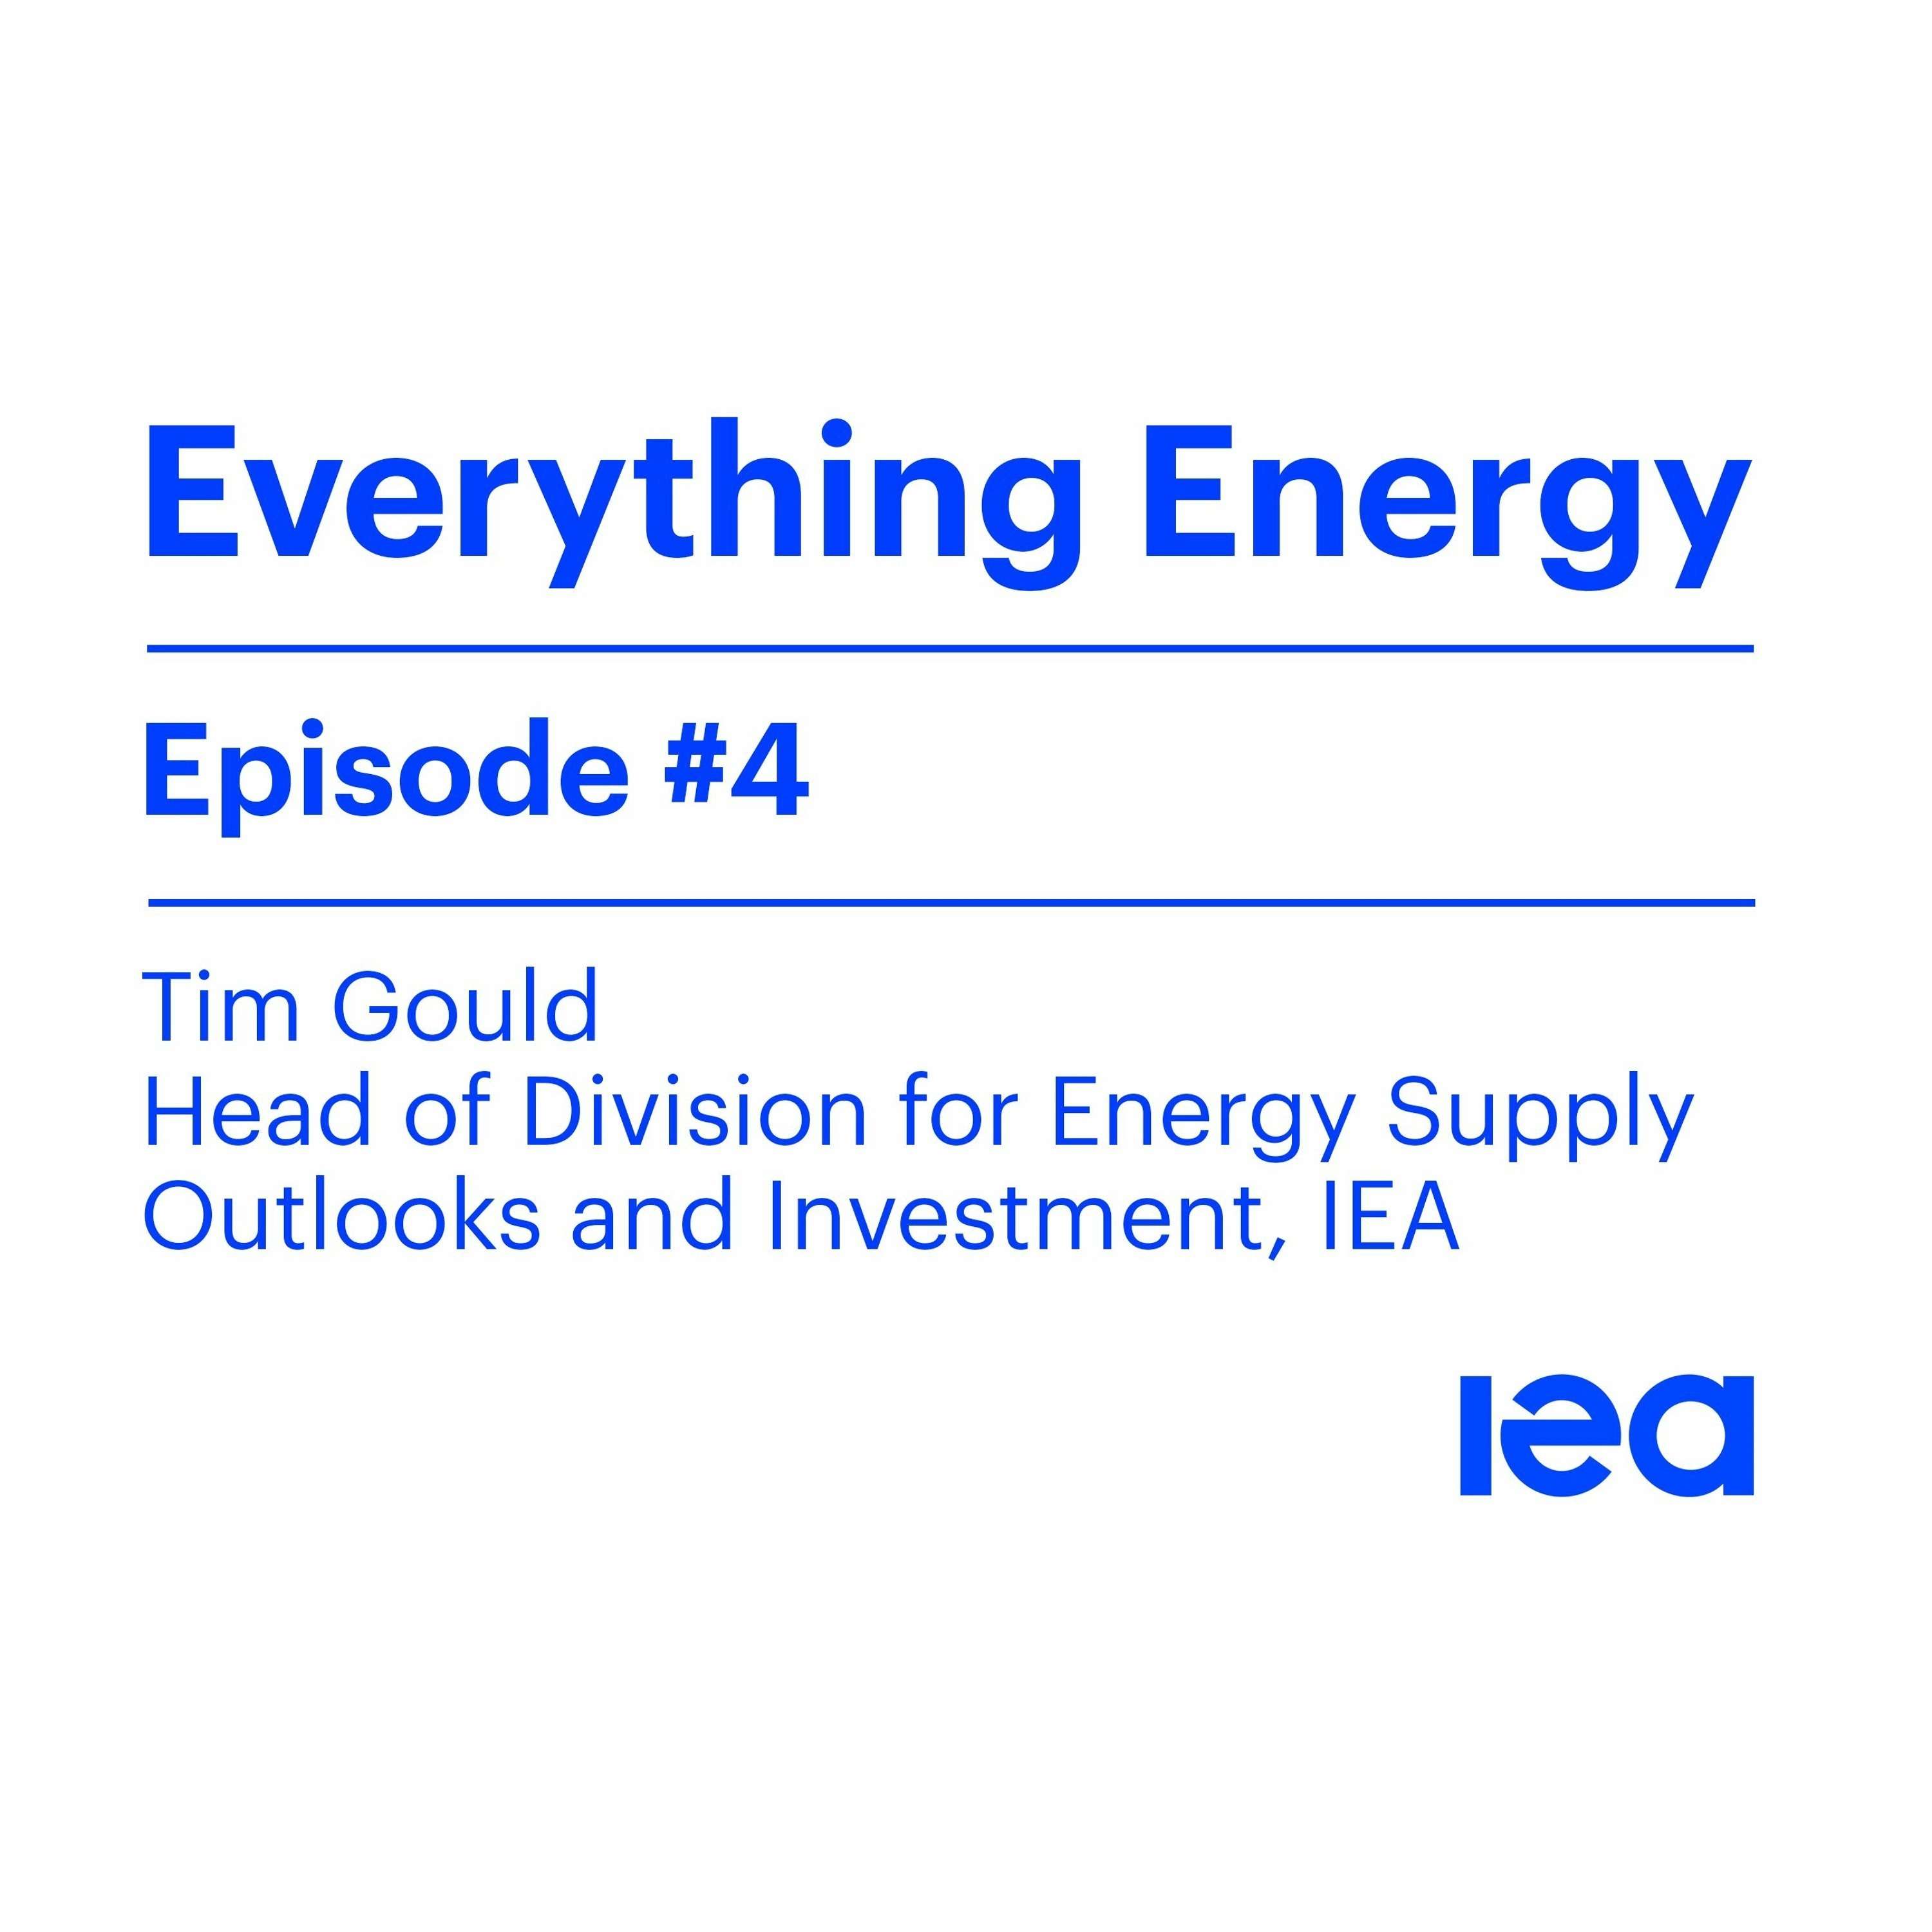 Episode 4: How is the Covid-19 pandemic impacting investment in the energy sector?